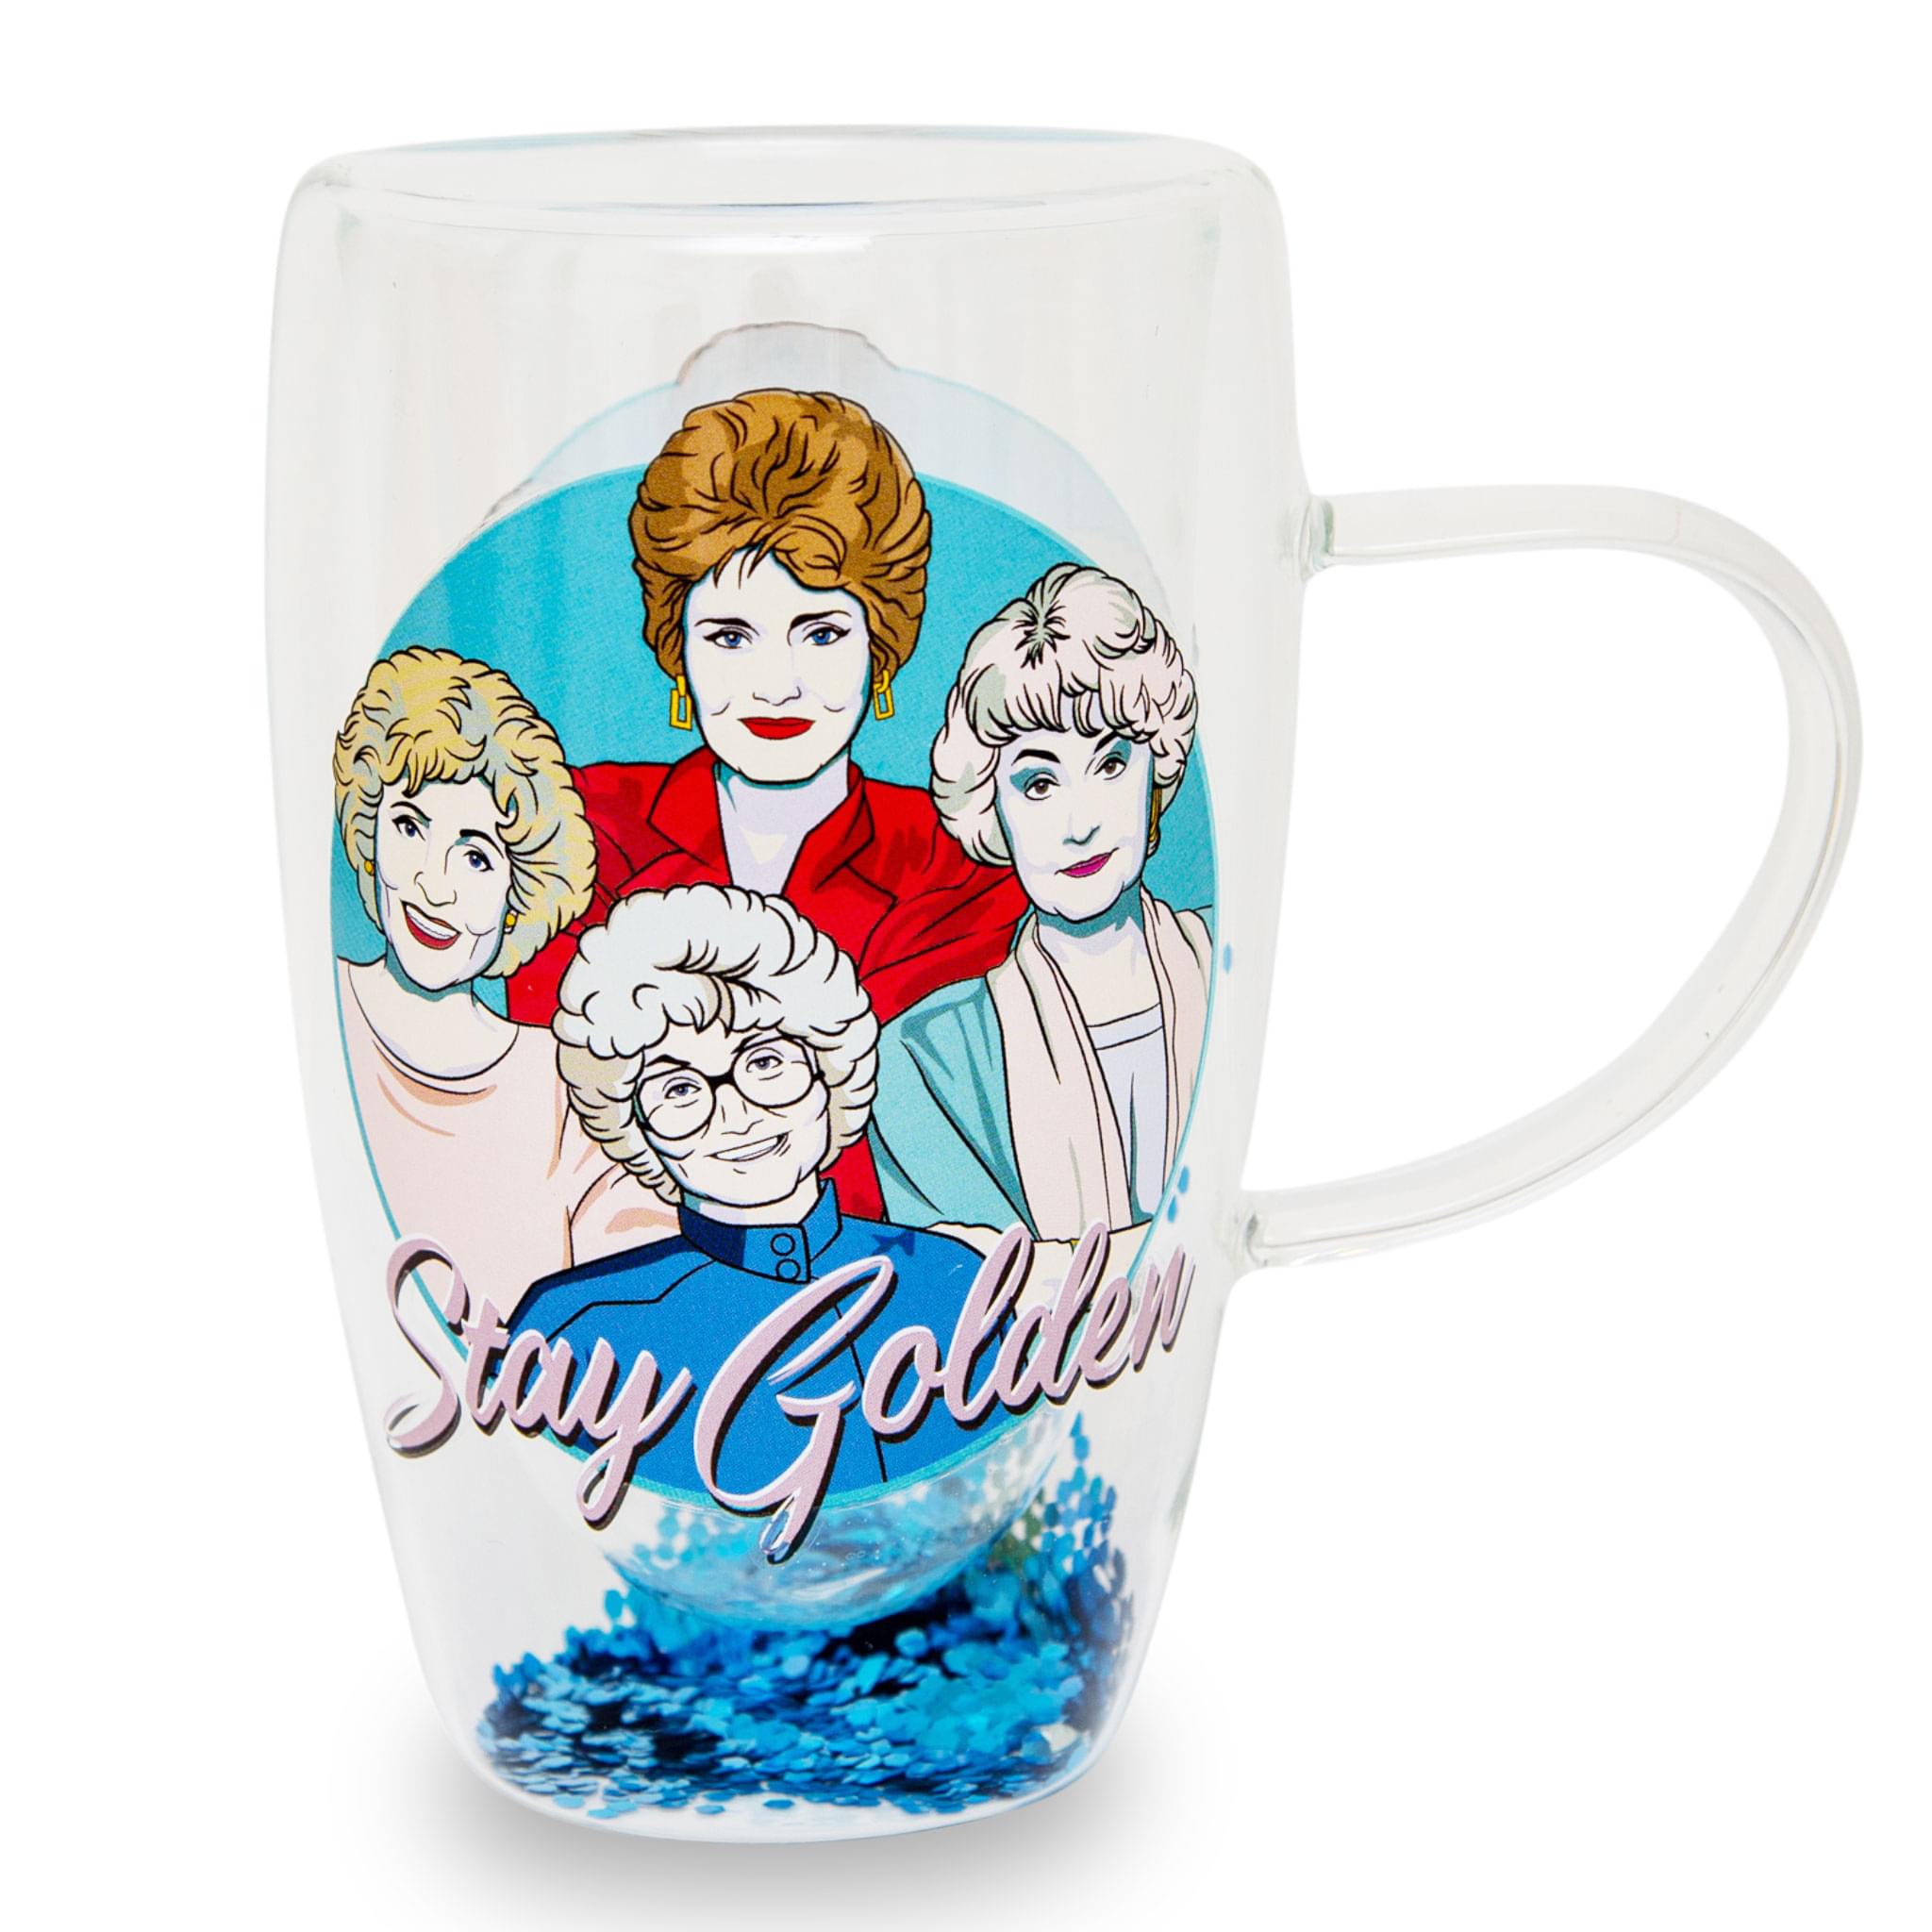 The Golden Girls Stay Golden Double-Walled Glass Mug , Holds 15 Ounces